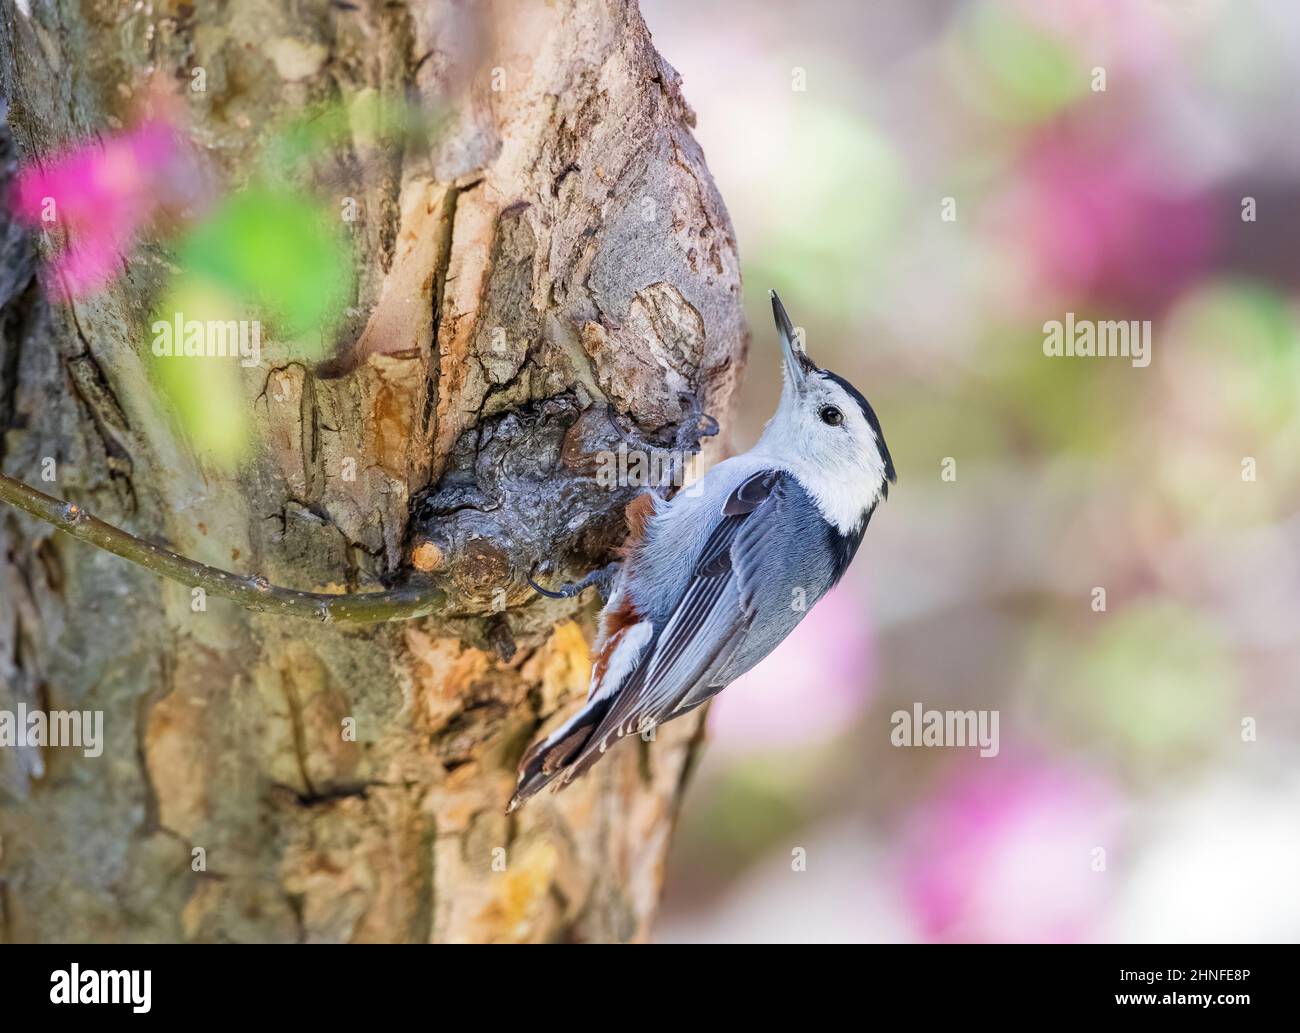 Closeup of a White-breasted Nuthatch clinging to the bark of a Crabapple tree with a colorful soft background of pink and green Spring blossoms. Stock Photo